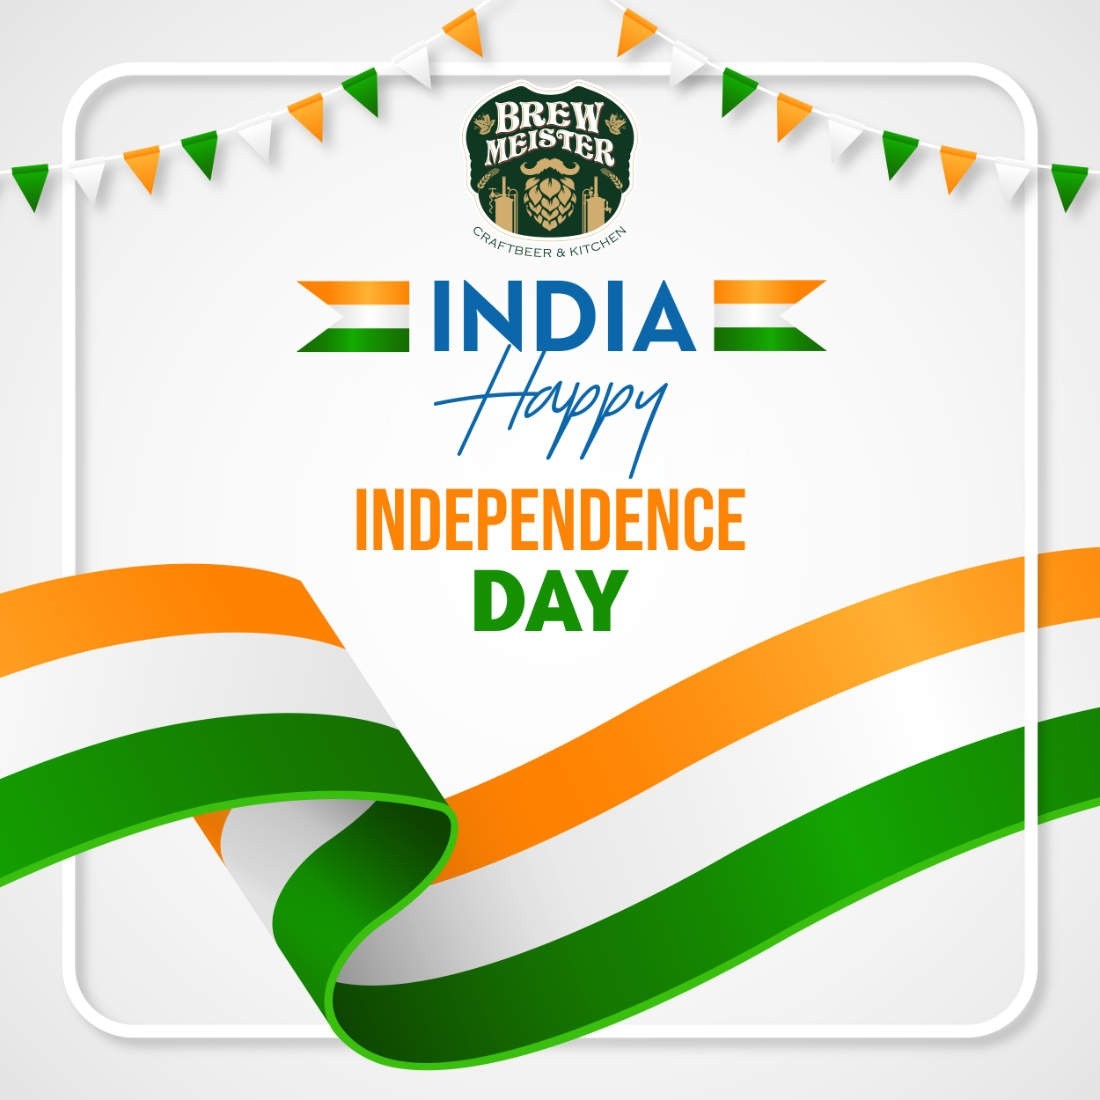 Indian Independence Day Graphics Designs for Businesses Image 1